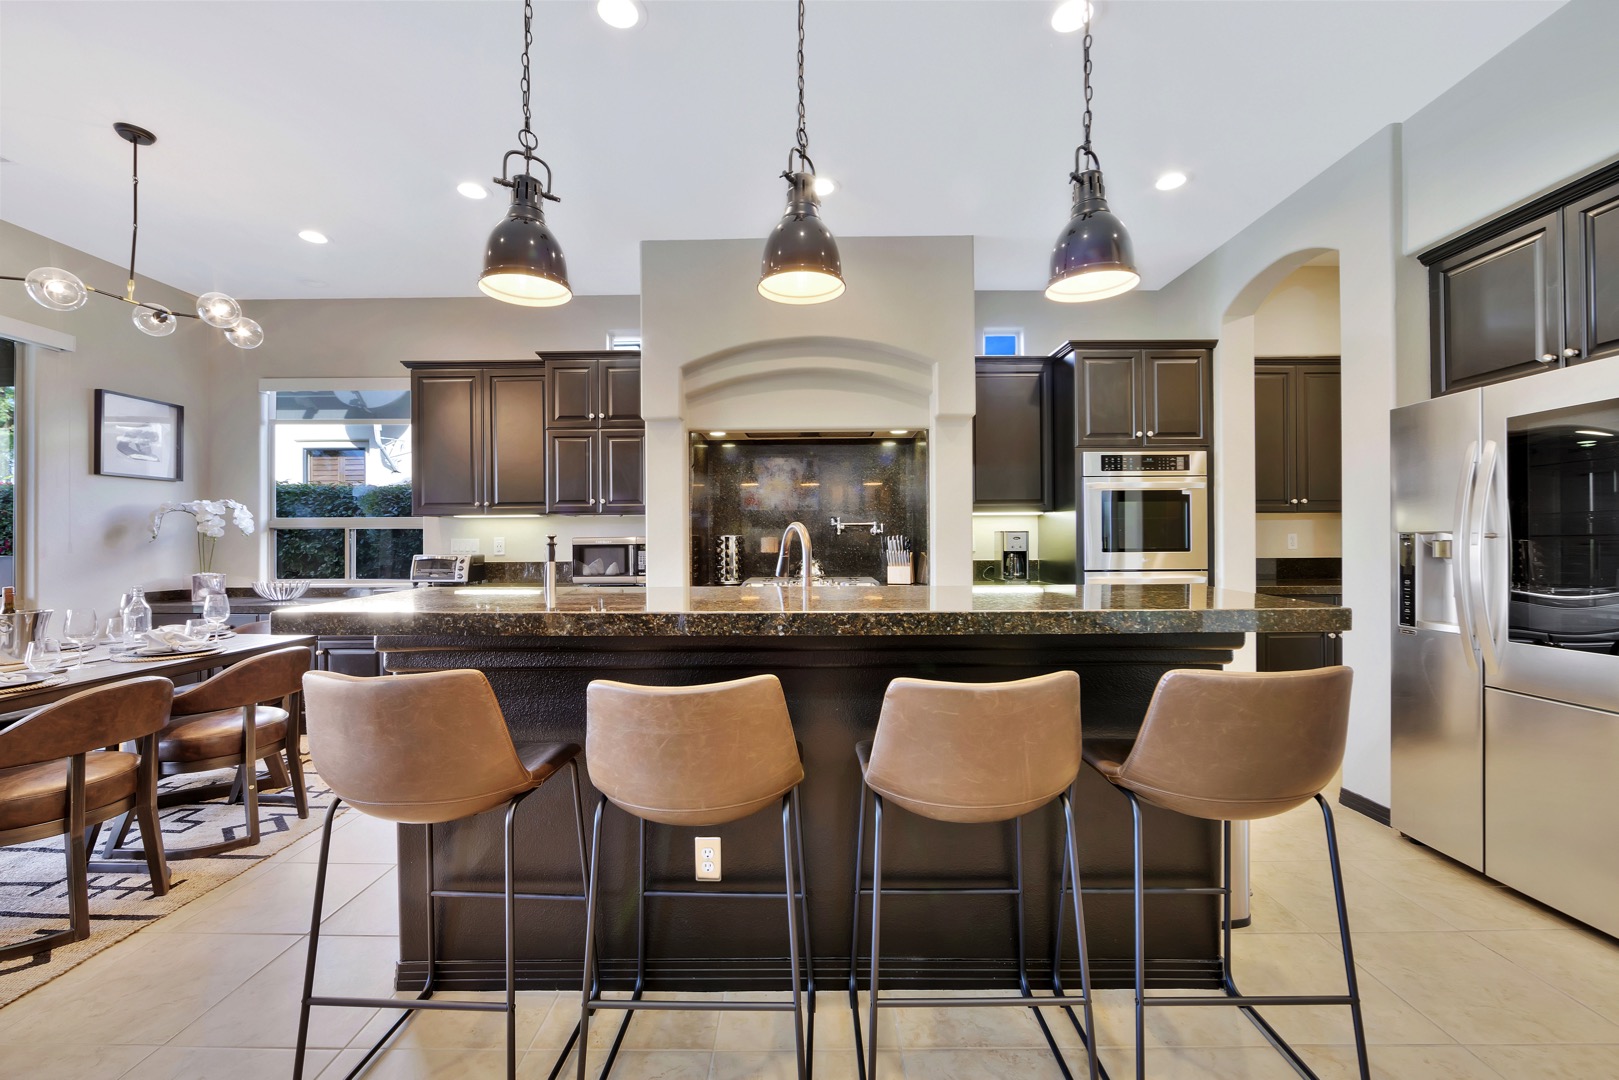 Breakfast bar with stools